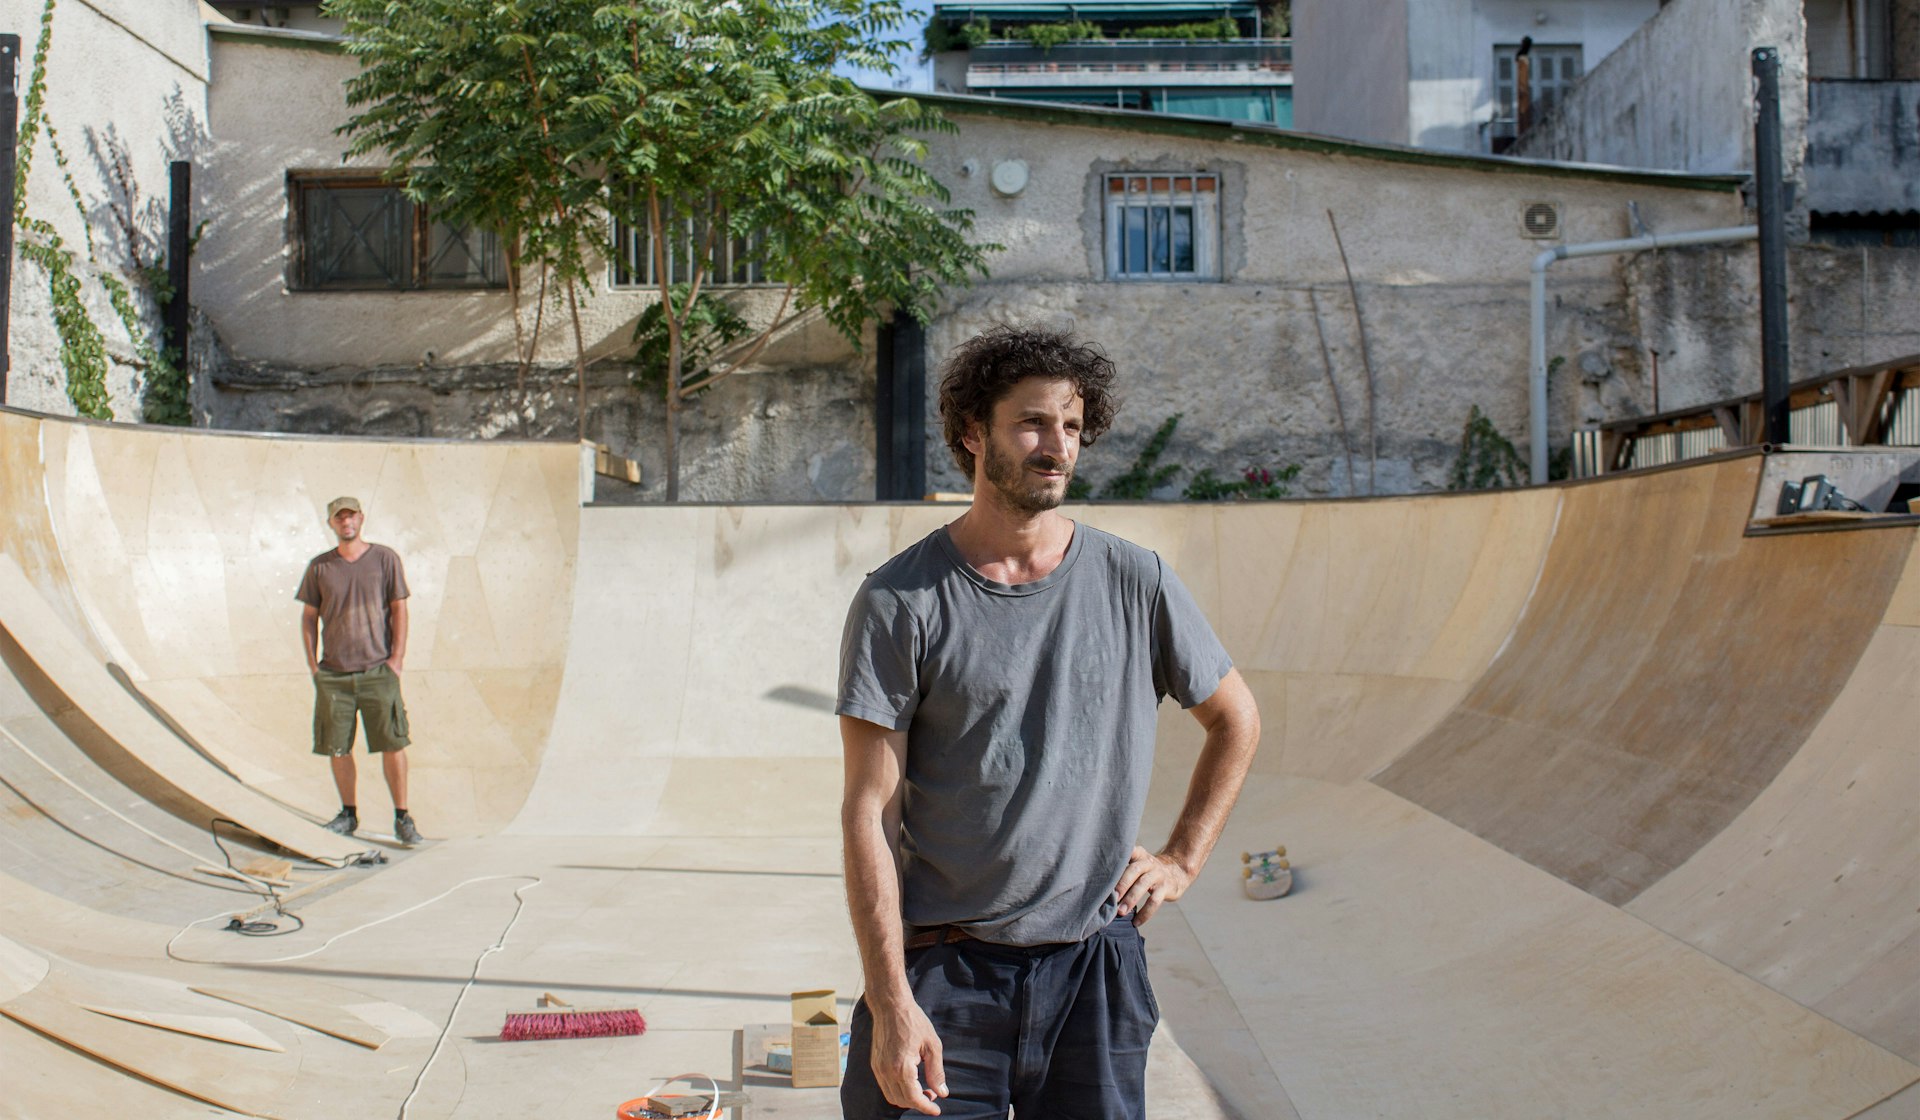 The architect building his own skate oasis in the ruins of the Greek crisis